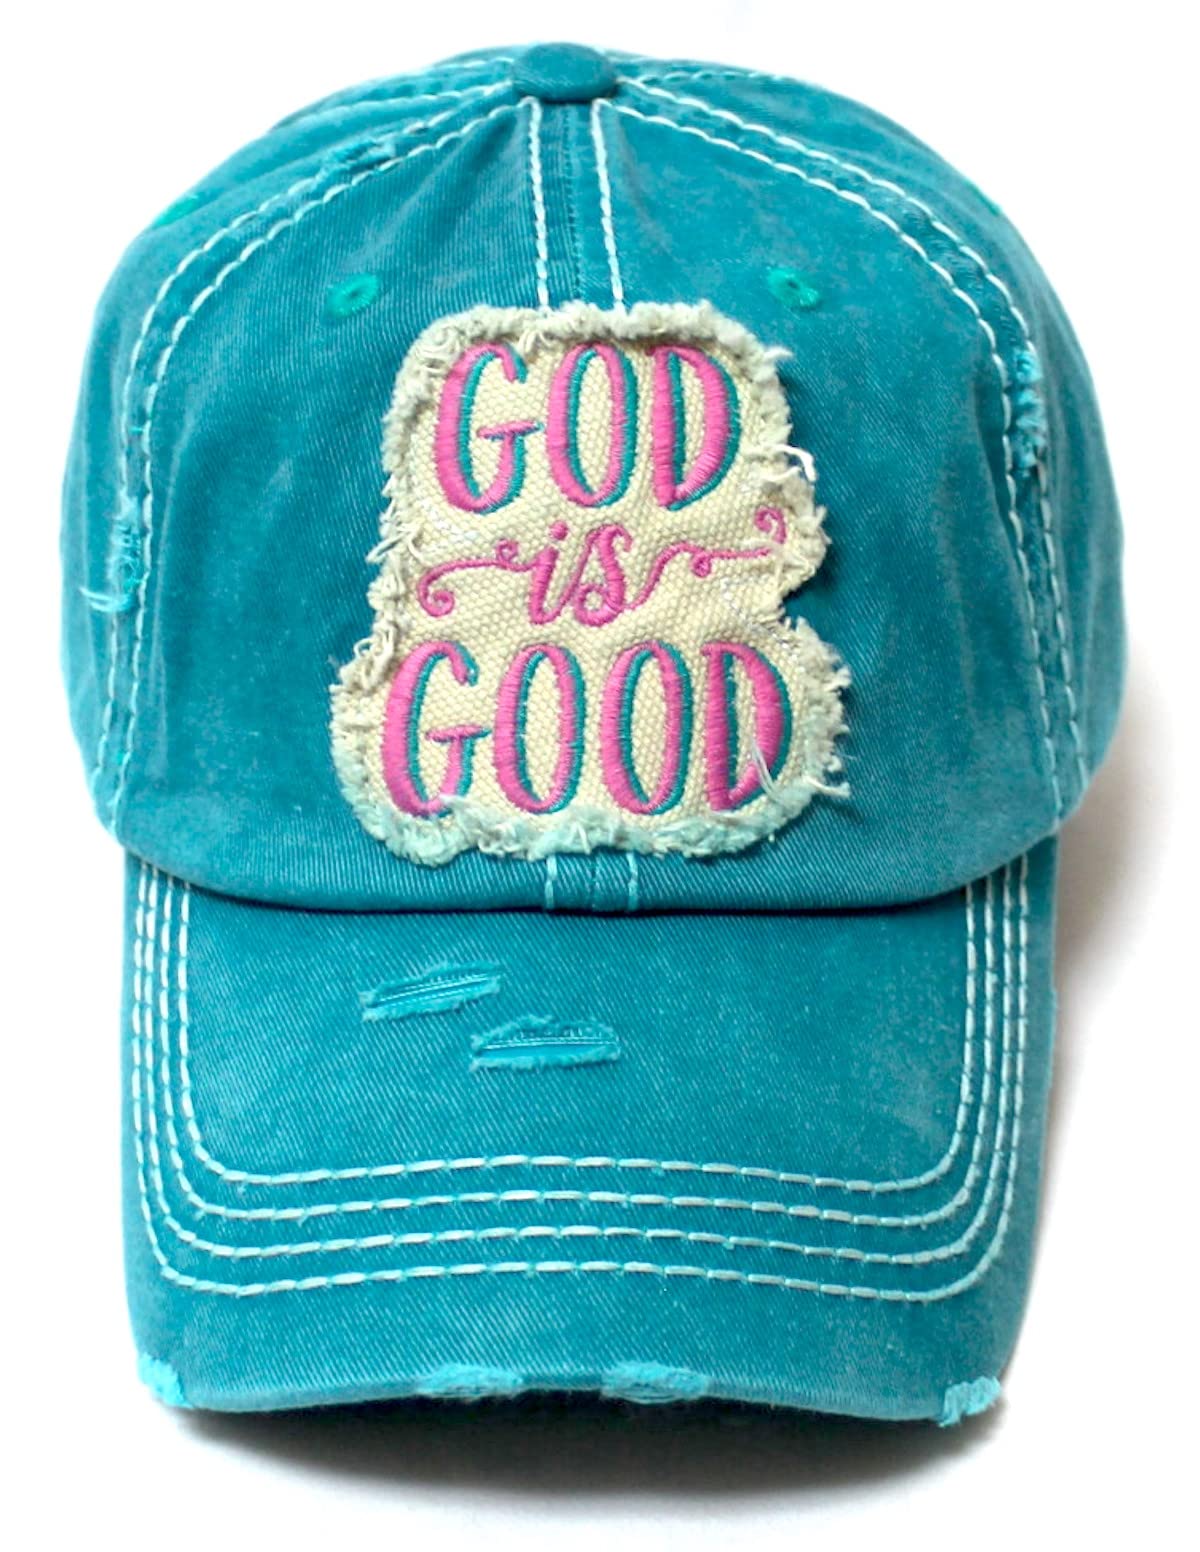 CAPS 'N VINTAGE Women's GOD is Good Patch Embroidery Monogram Hat